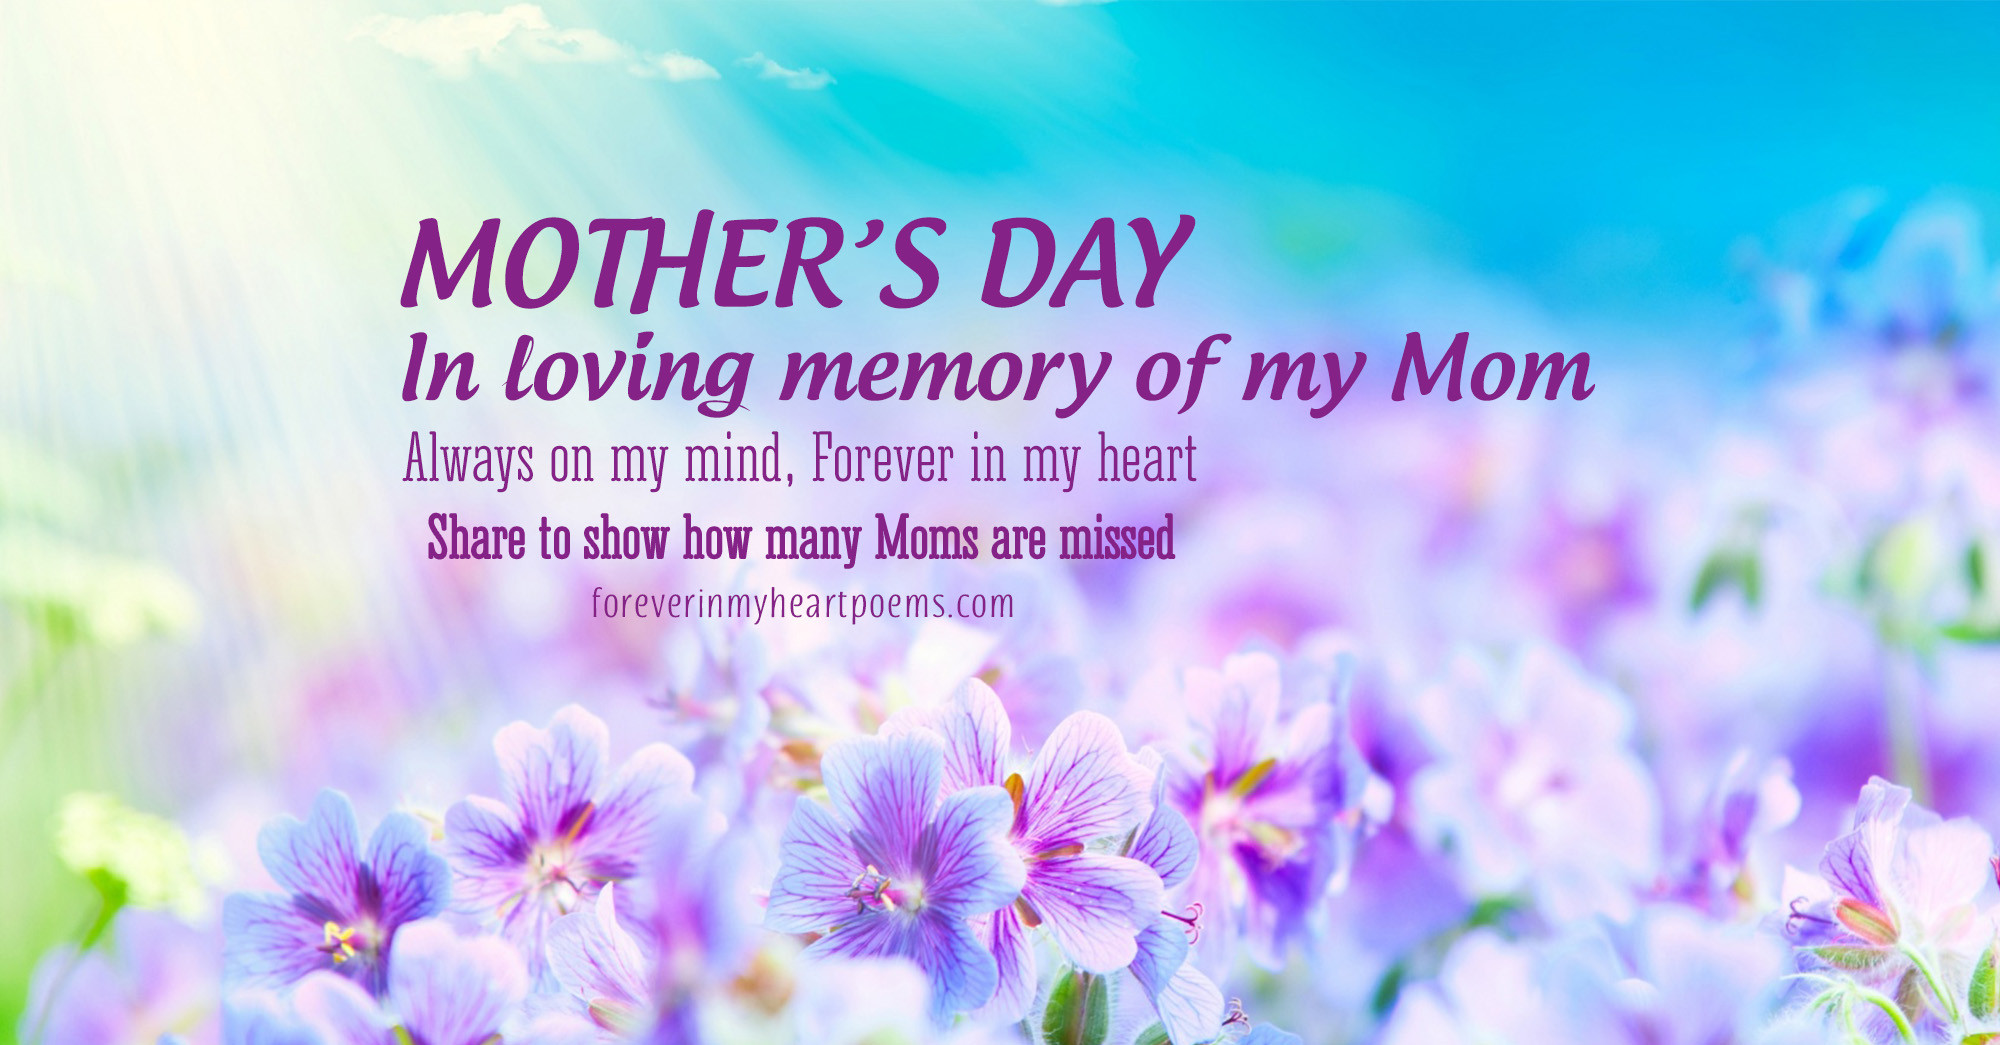 Missing Mom On Mother's Day Quotes
 15 Best Missing Mom Quotes on Mother s Day In loving